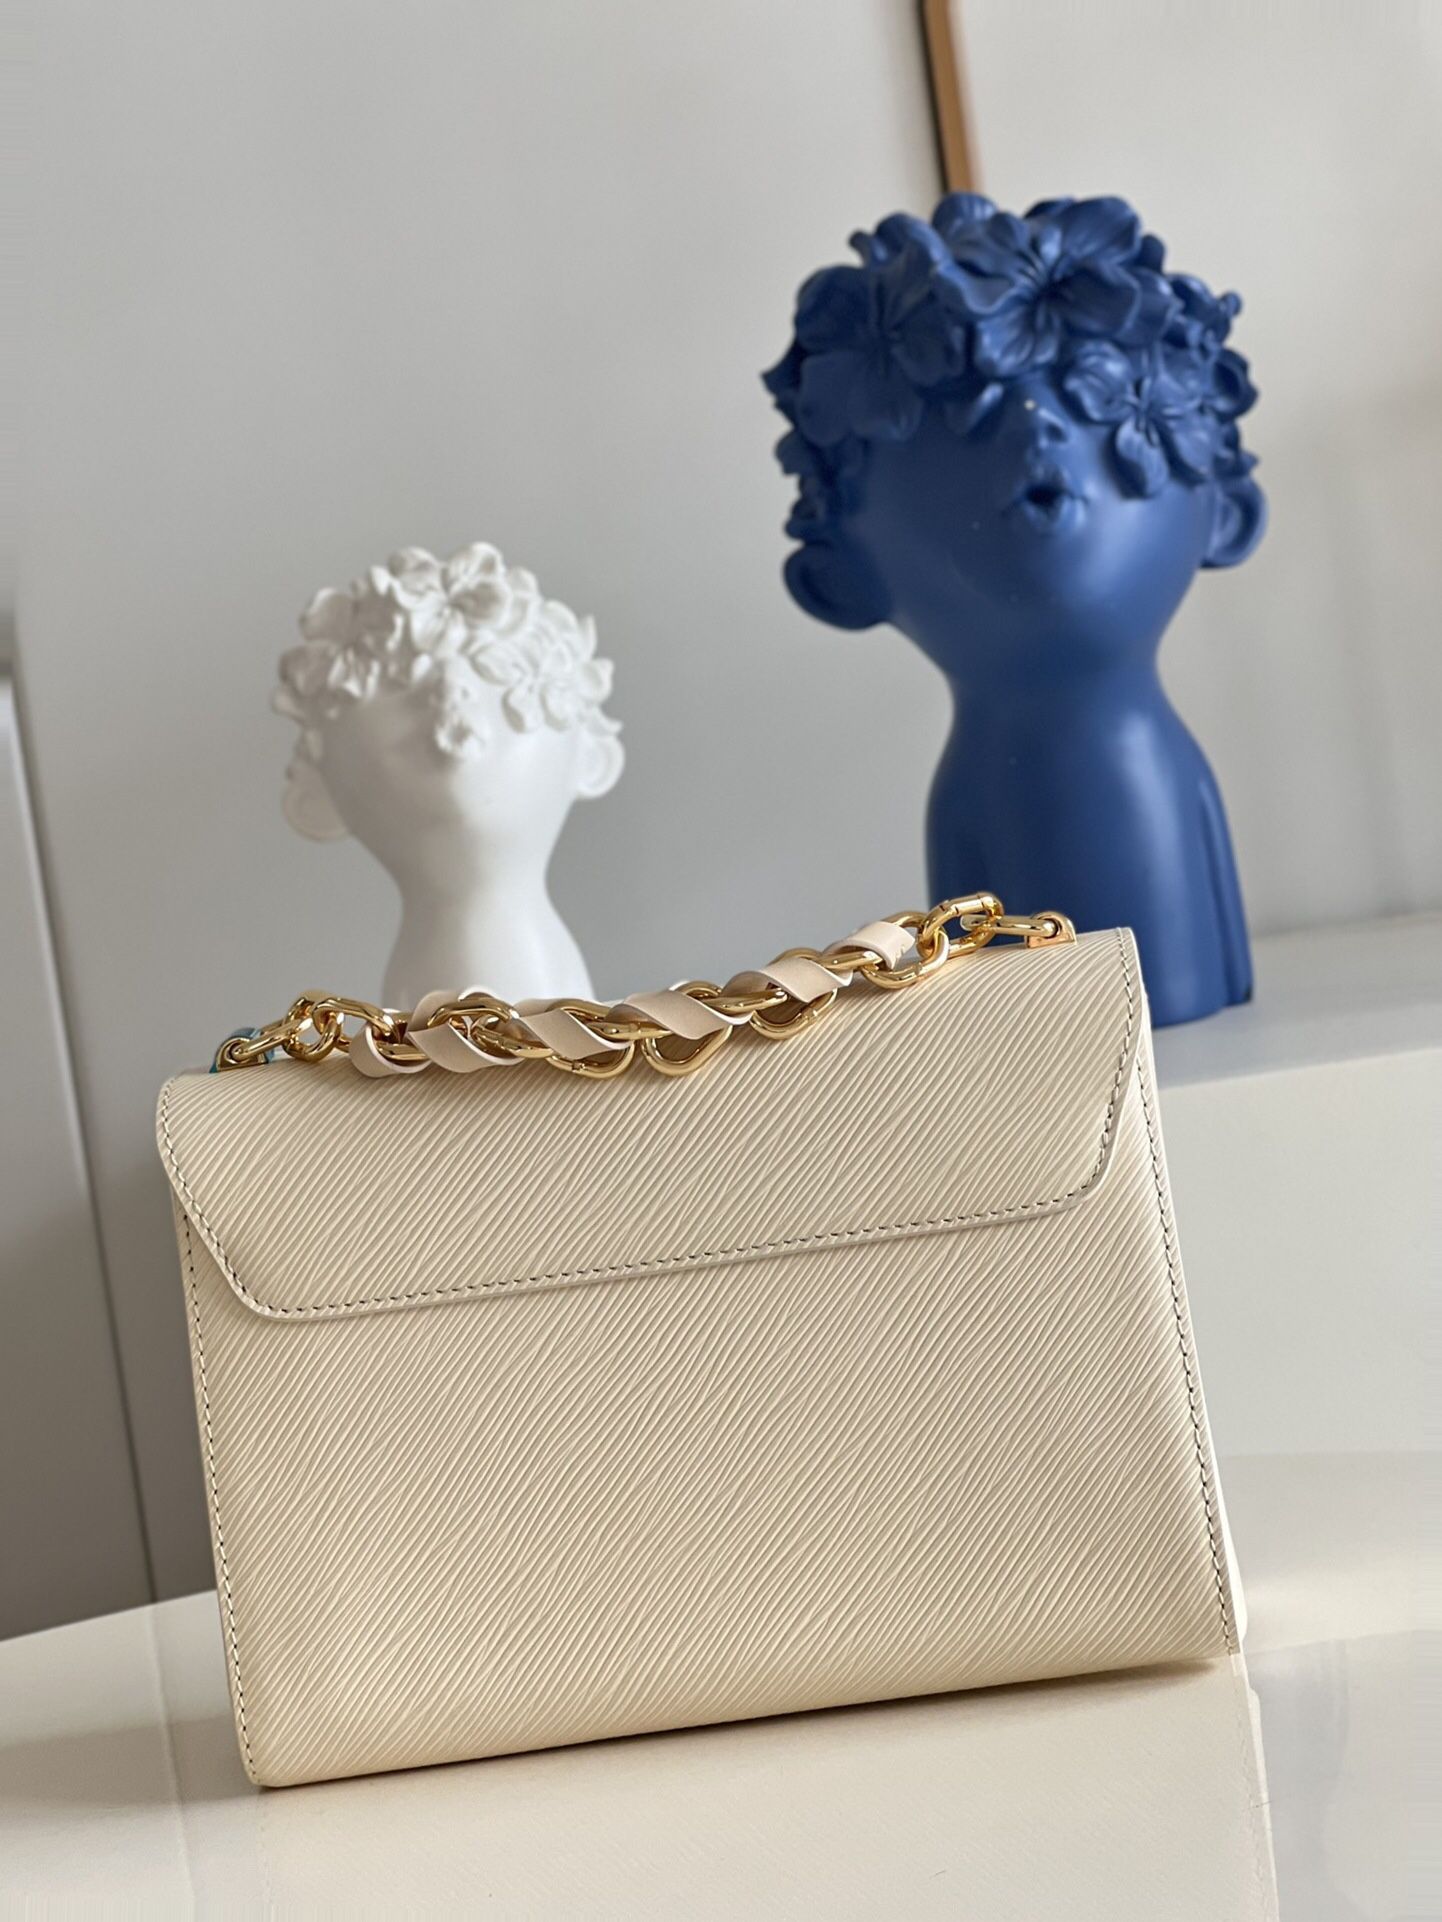 Get Ready To Make A Statement With The Twist Mm Bag. for Sale in Los  Angeles, CA - OfferUp